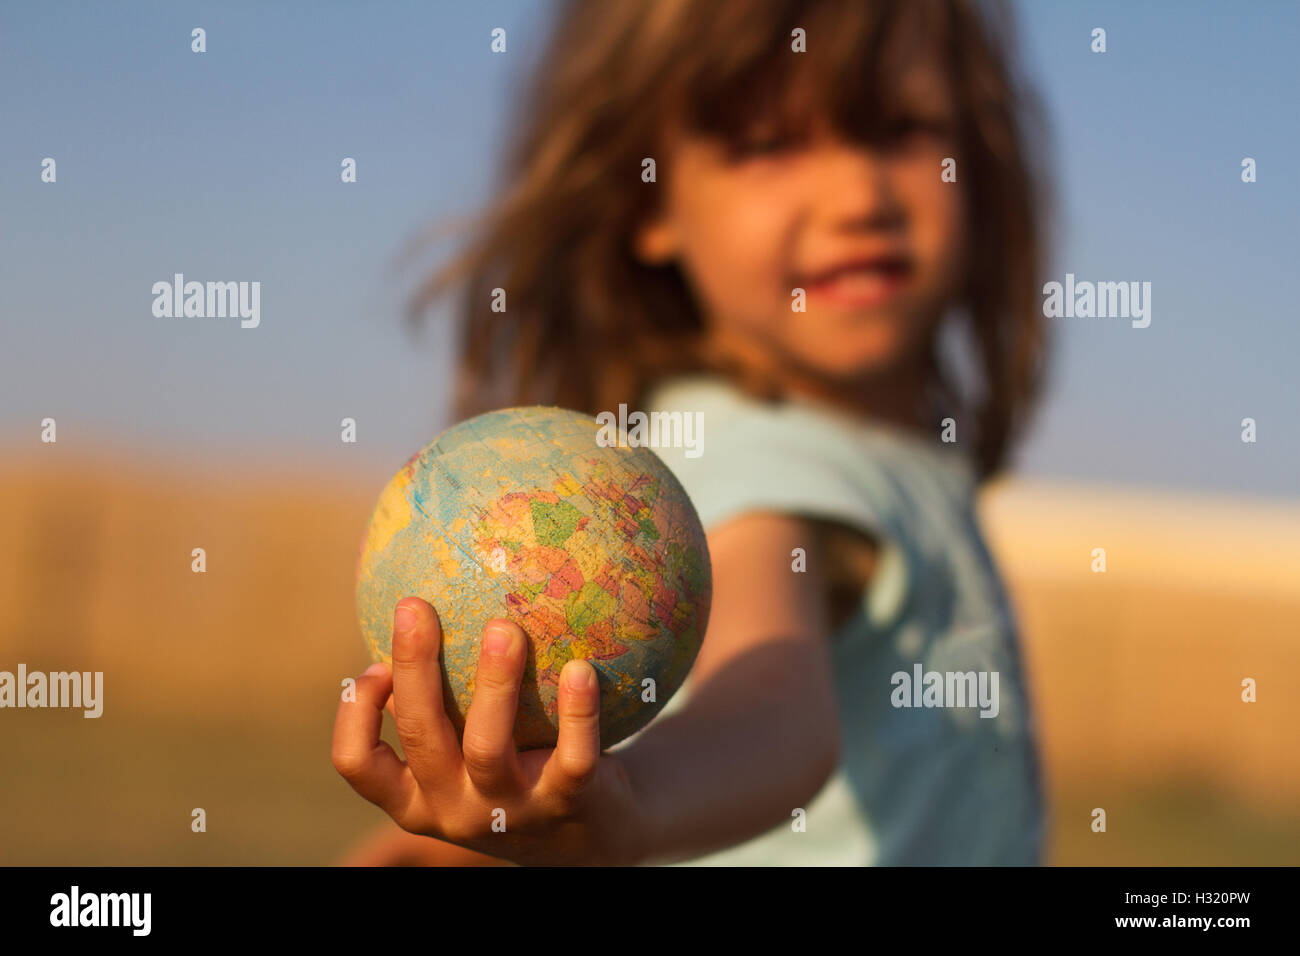 Front view of a child hand holding a damaged toy globe, shallow depth of field Stock Photo